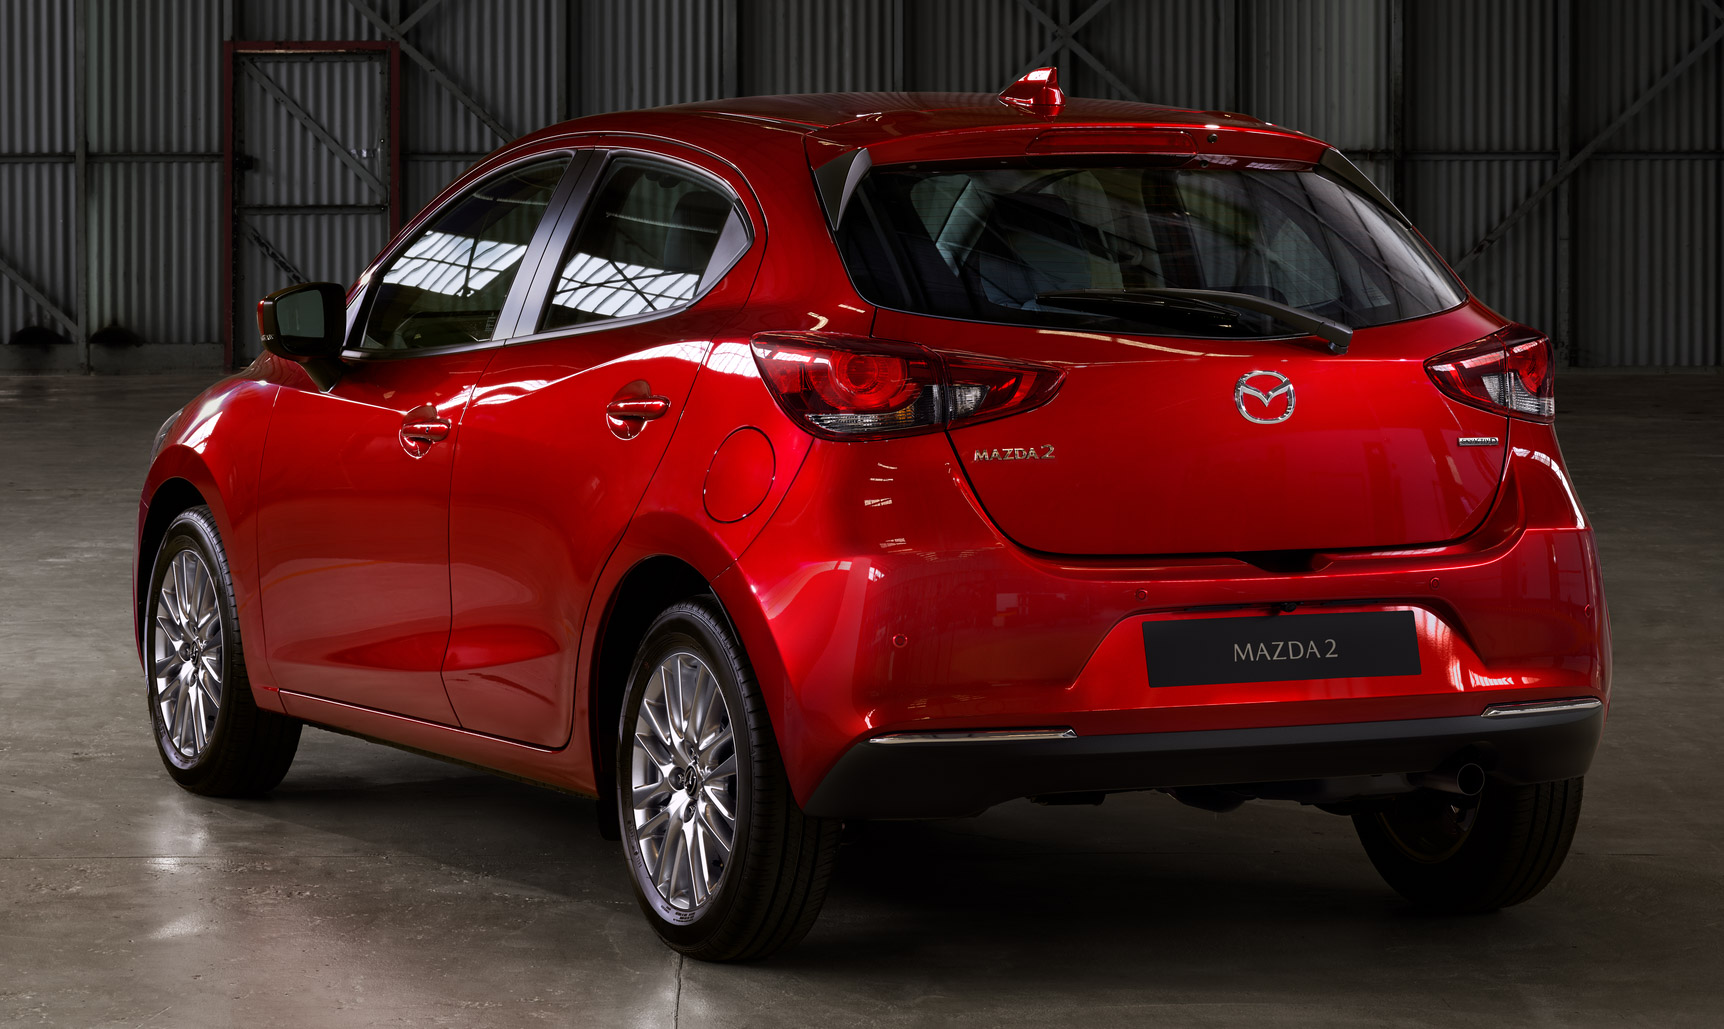 2020 Mazda 2 facelift launched in Malaysia - now with GVC Plus, Android ...